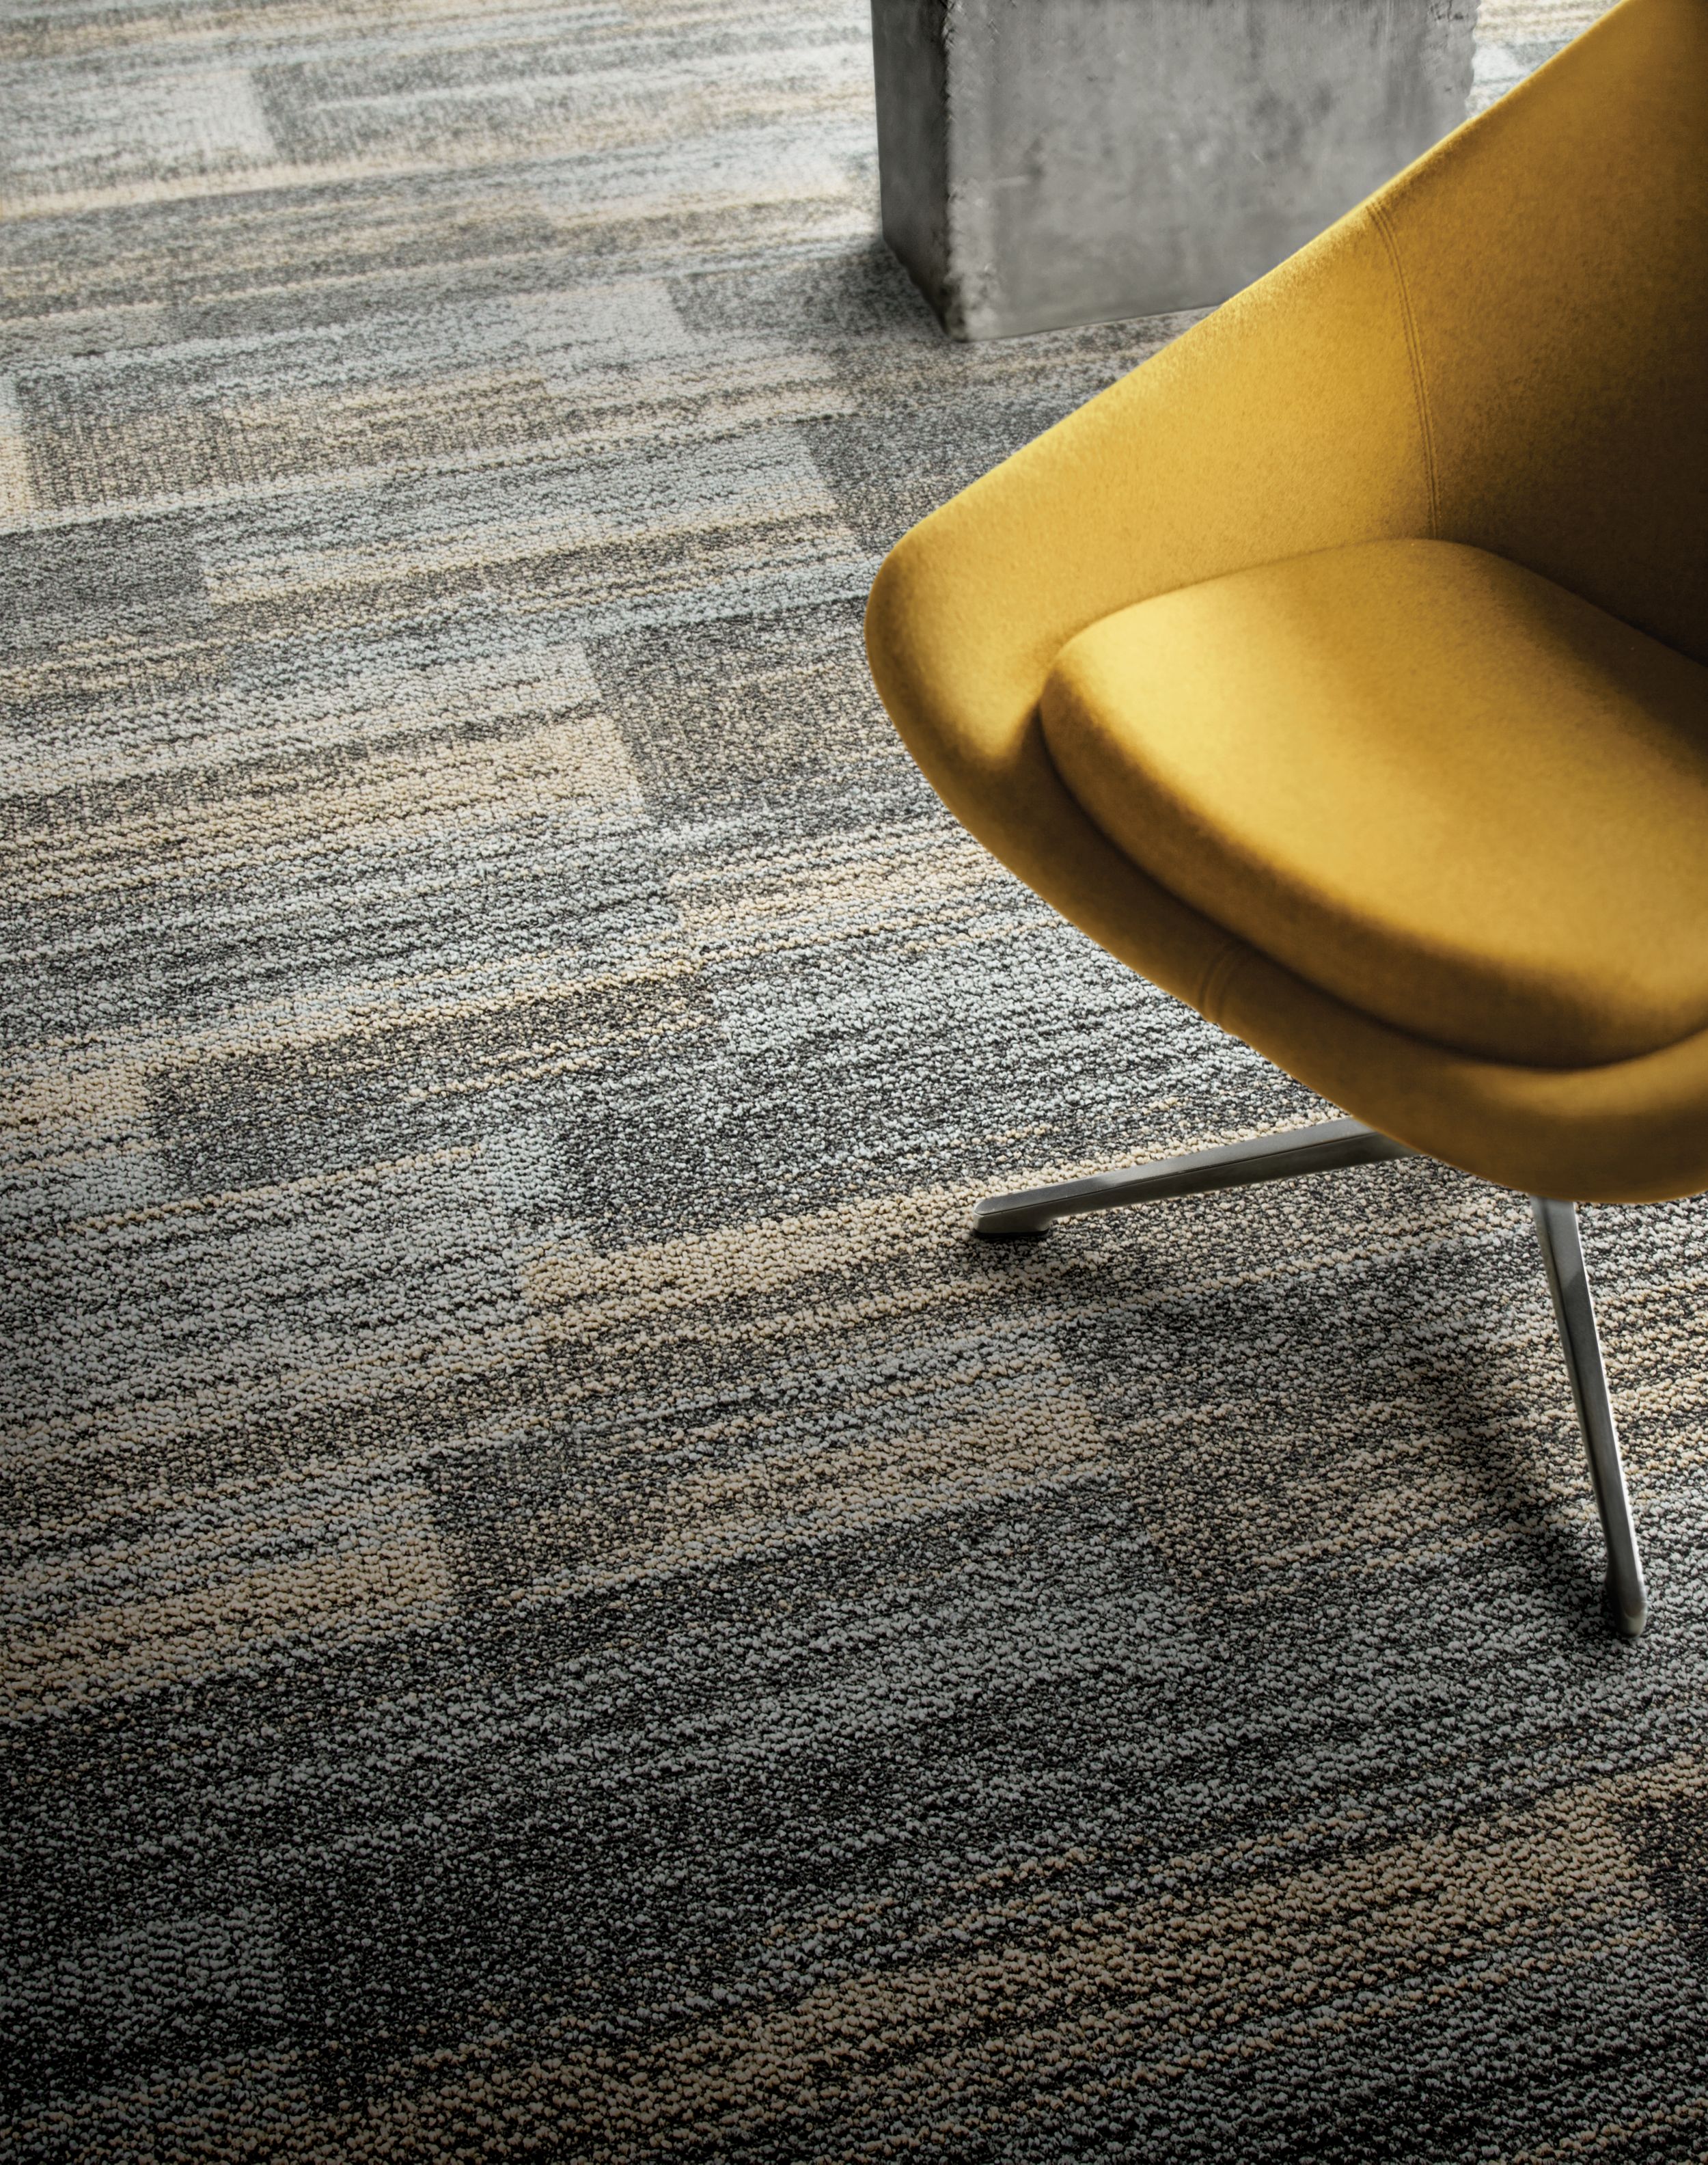 Close-up of Interface AE313 plank carpet tile with yellow chair imagen número 1